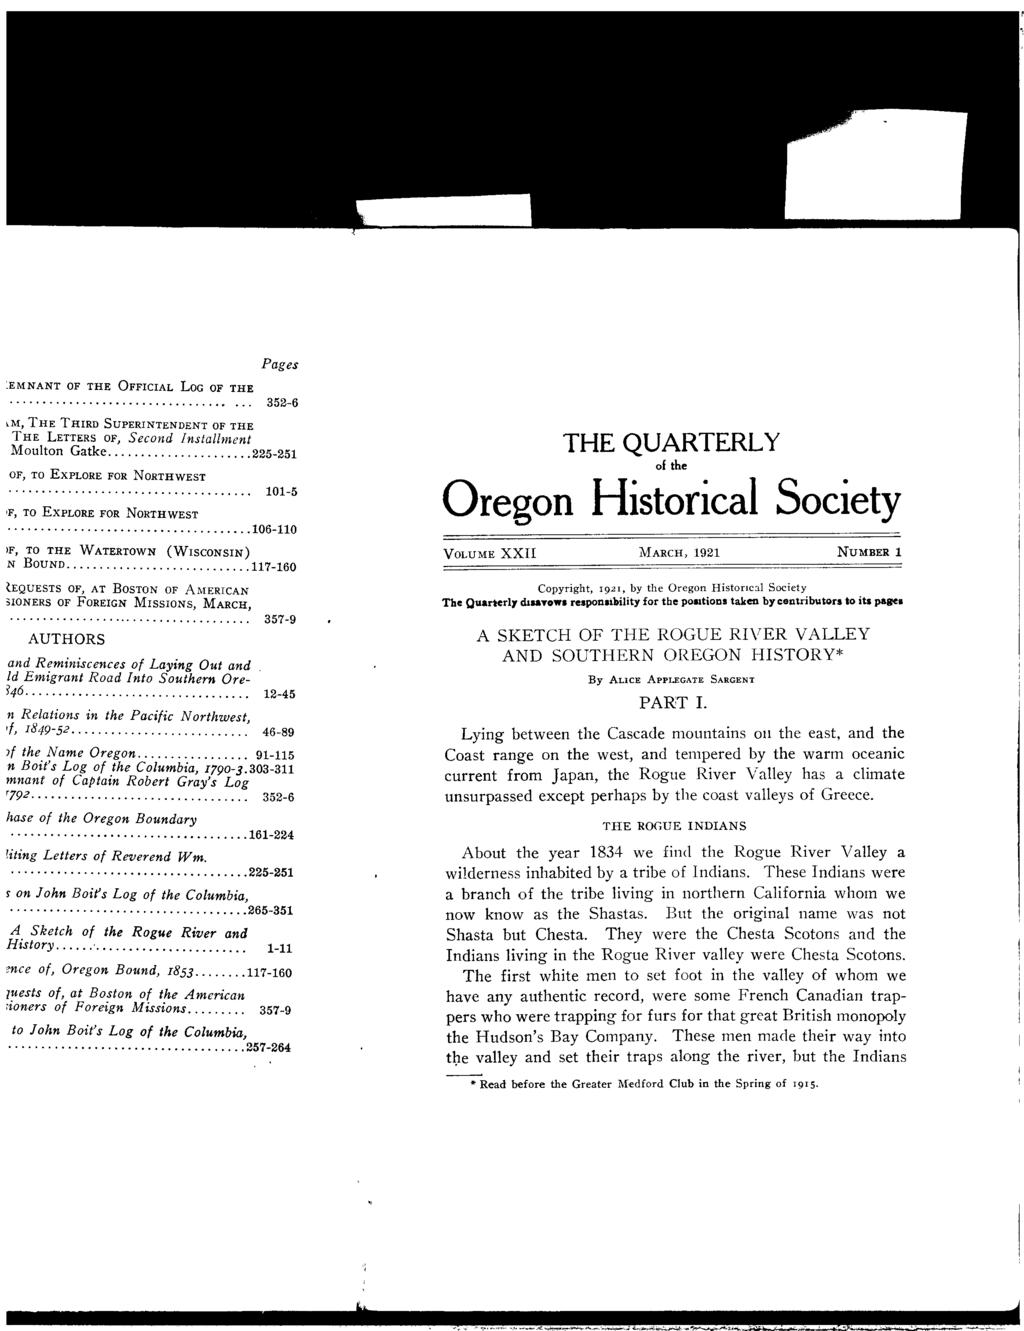 THE QUARTERLY of the Oregon Historical Society VOLUME XXII MARCH, 1921 NUMBER 1 Copyright, 1921, by the Oregon Historical Society The Quarterly disavows responsibility for the positions taken by